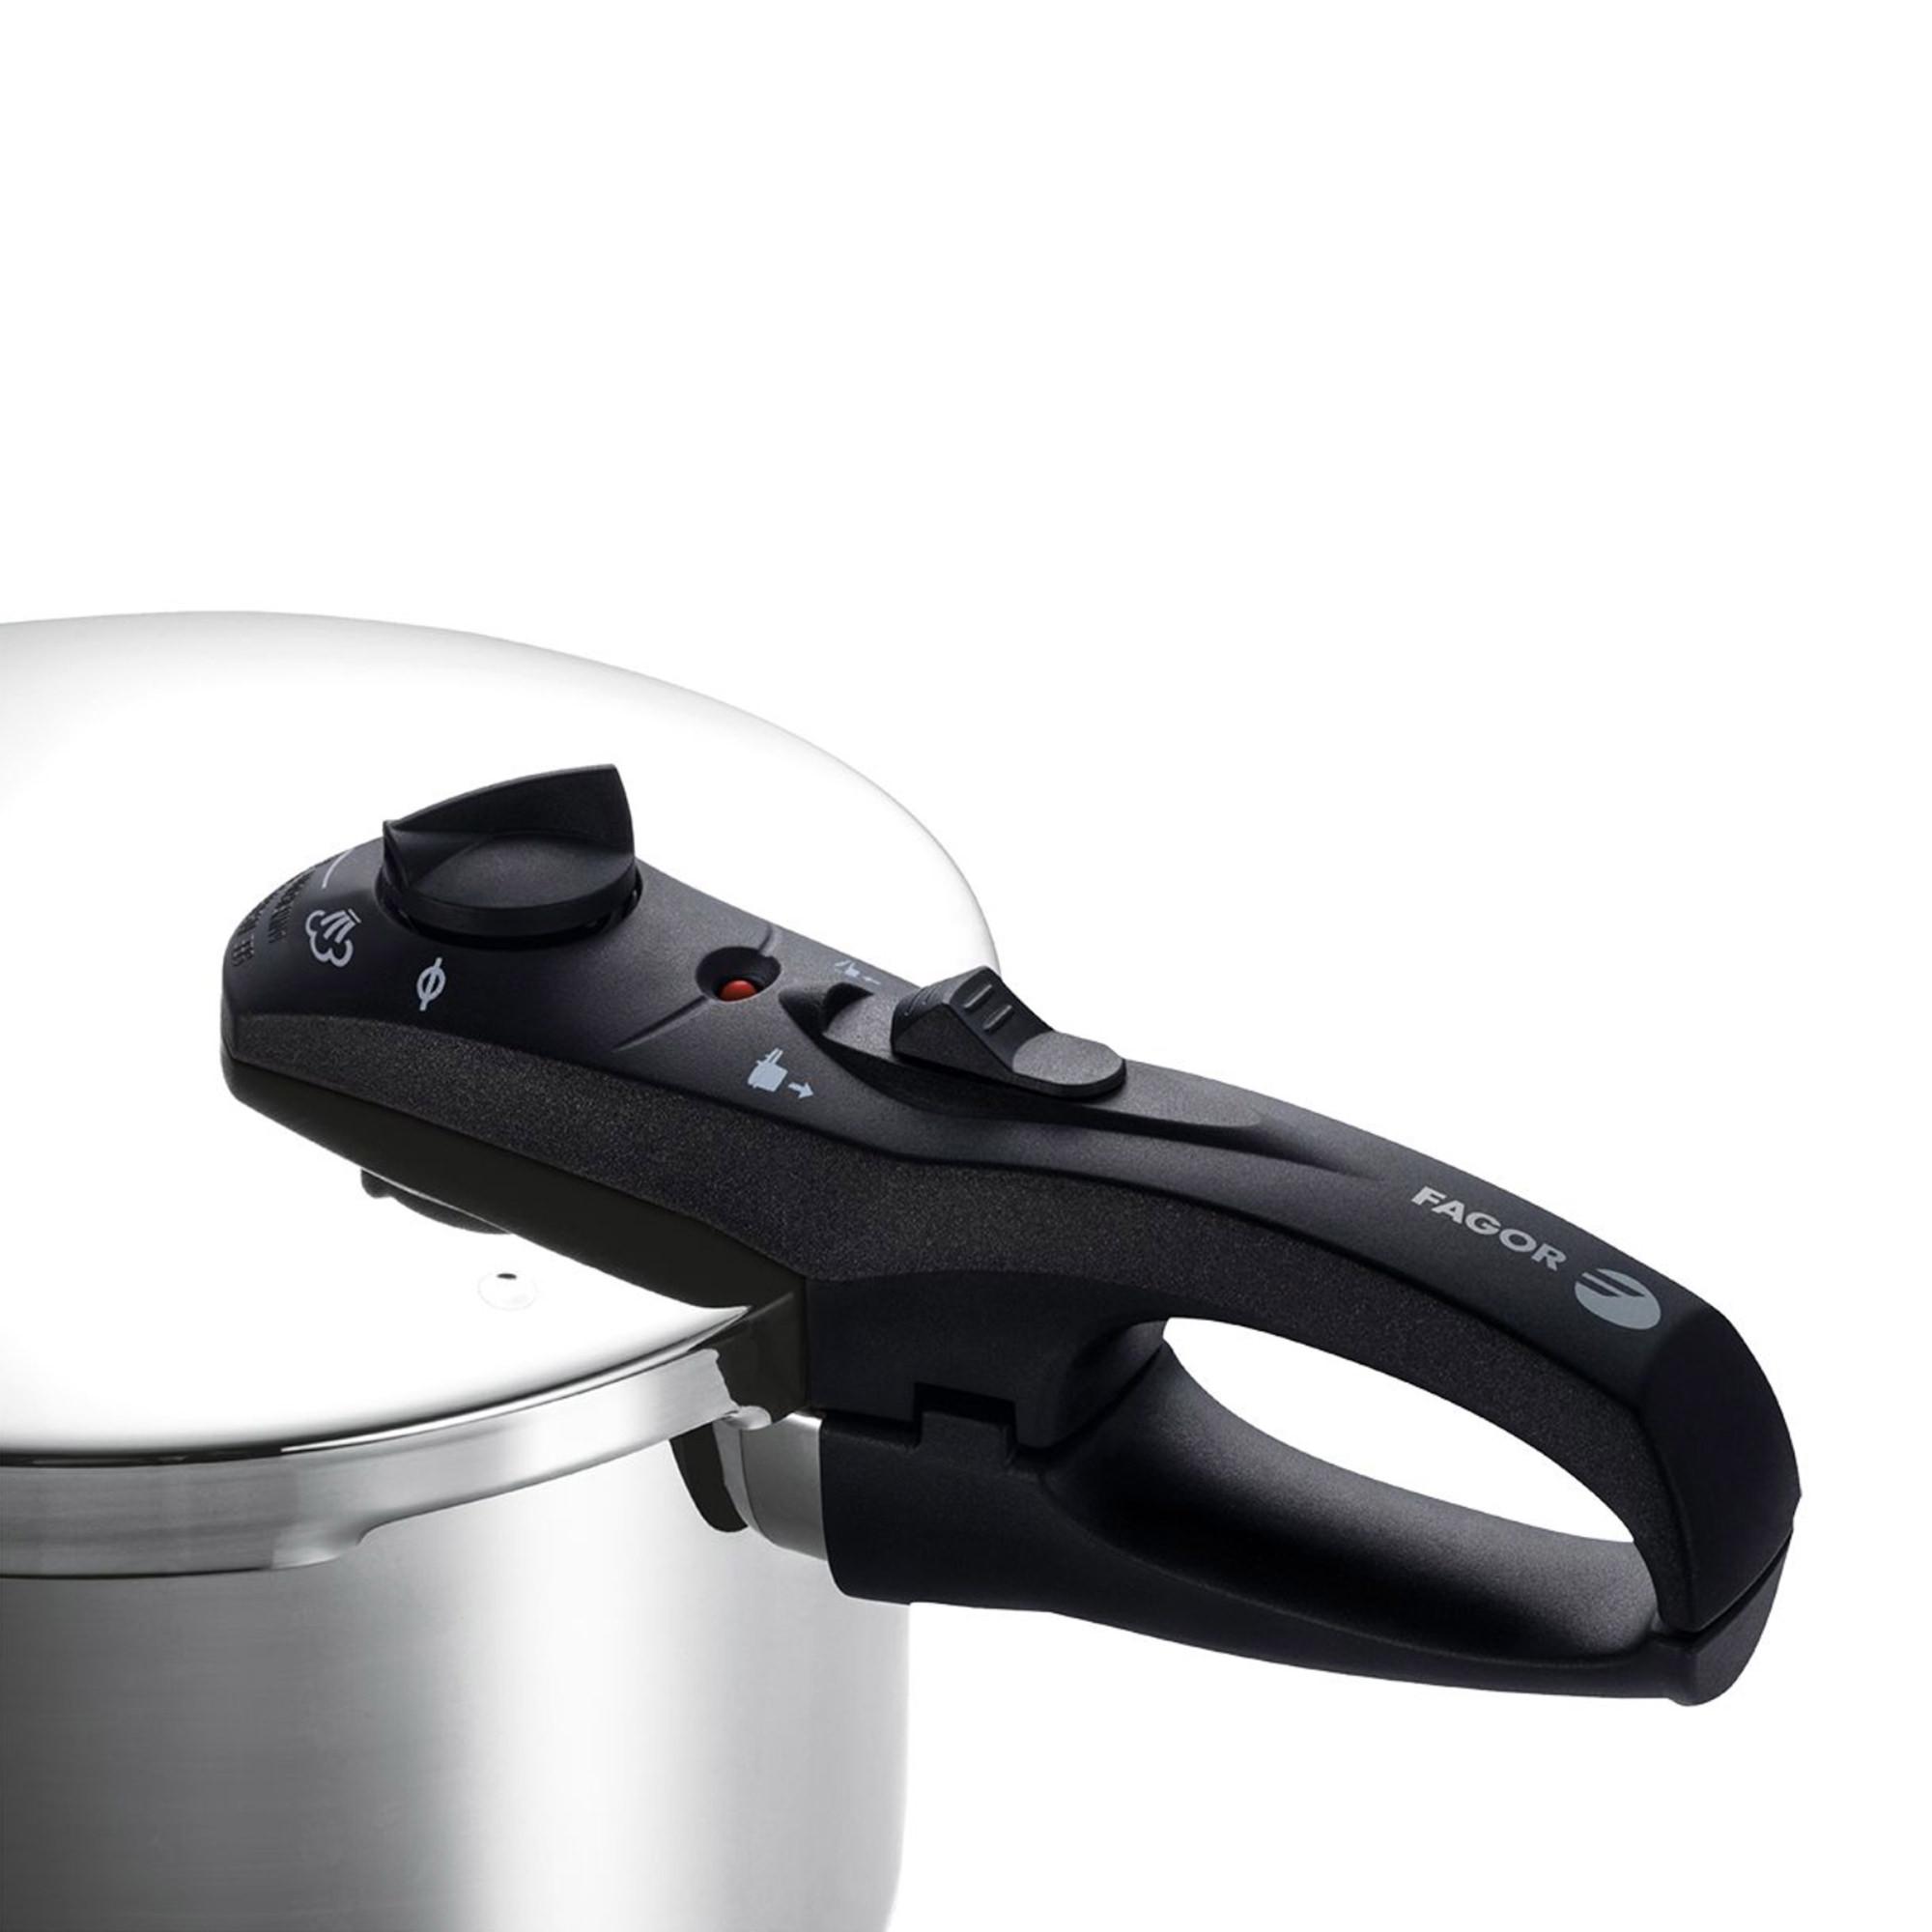 Fagor Duo Stainless Steel Pressure Cooker 7.5L Image 3